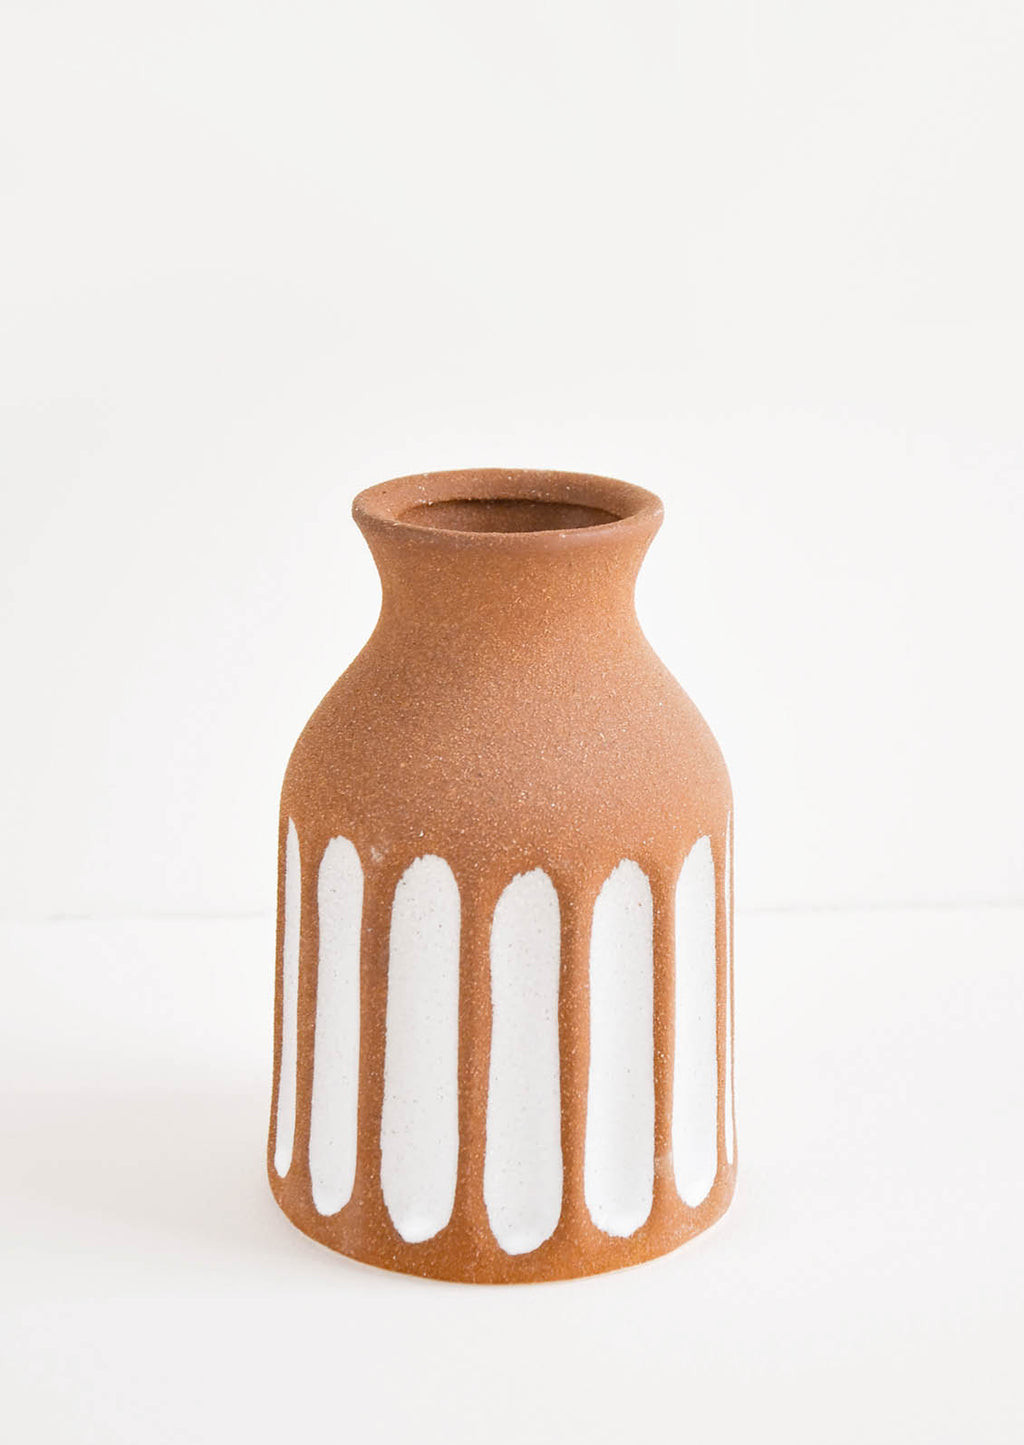 2: Brown Unglazed Ceramic Vase with Contrasting Vertical Stripe Detailing in White